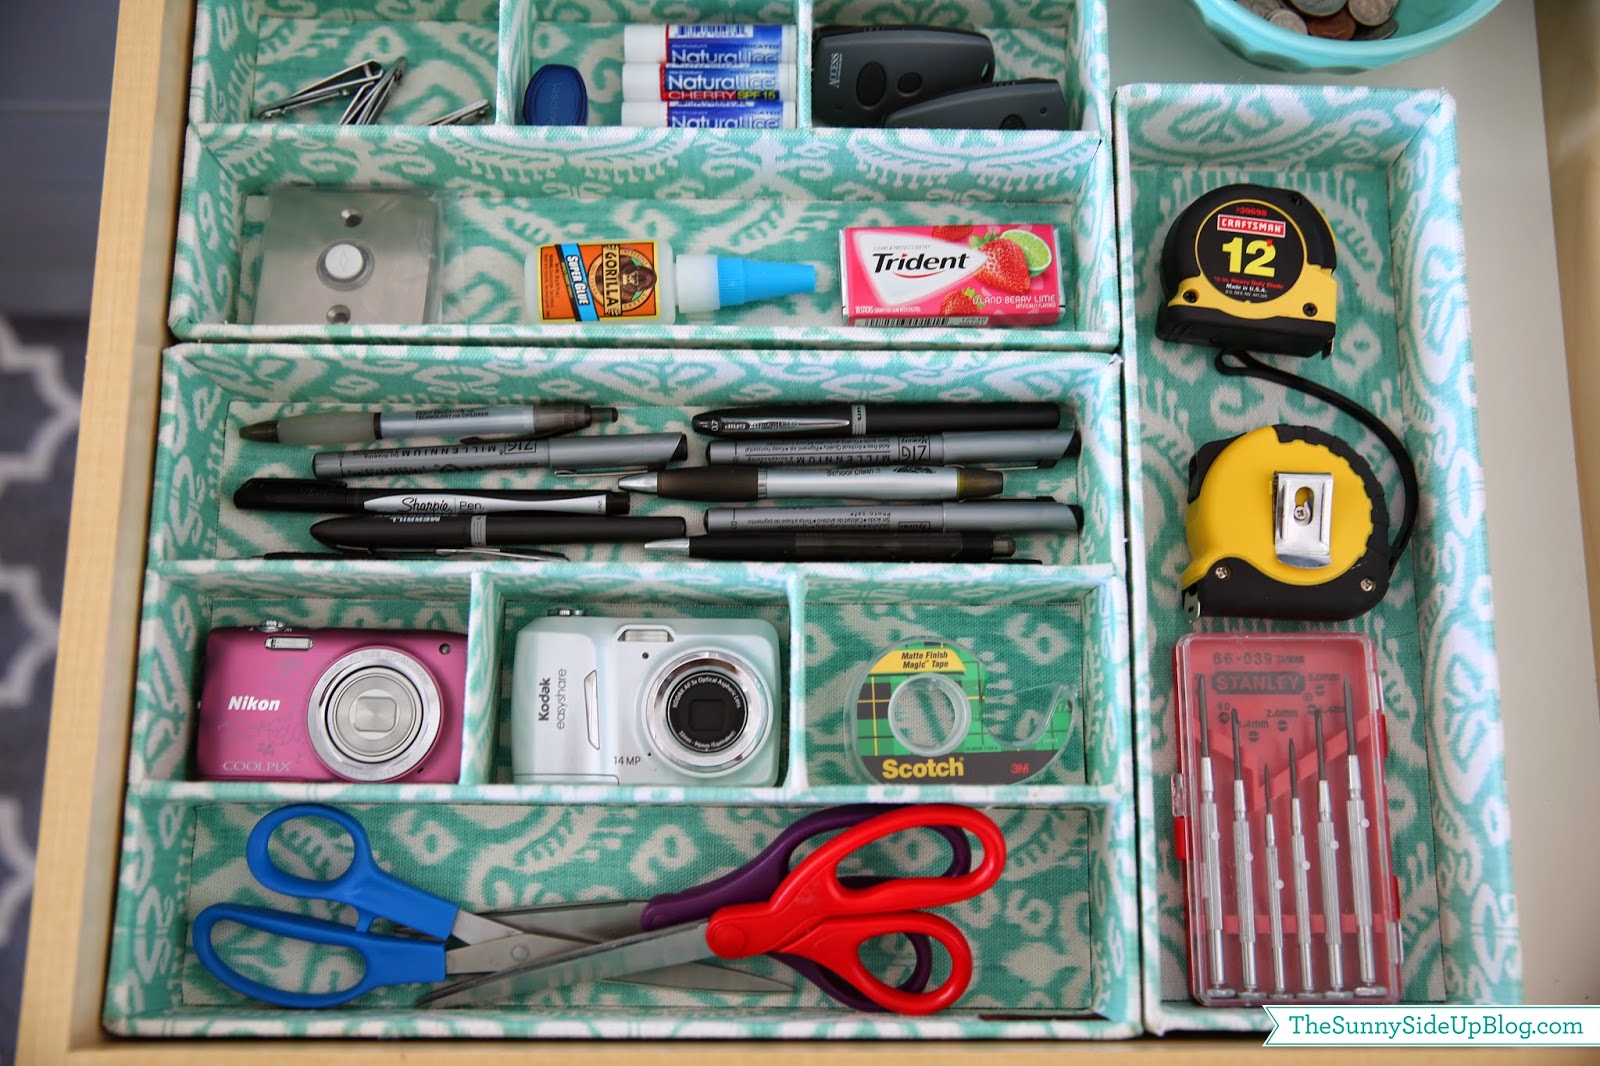 Why You Need To Get Rid Of Your Junk Drawer - The Organized Mama